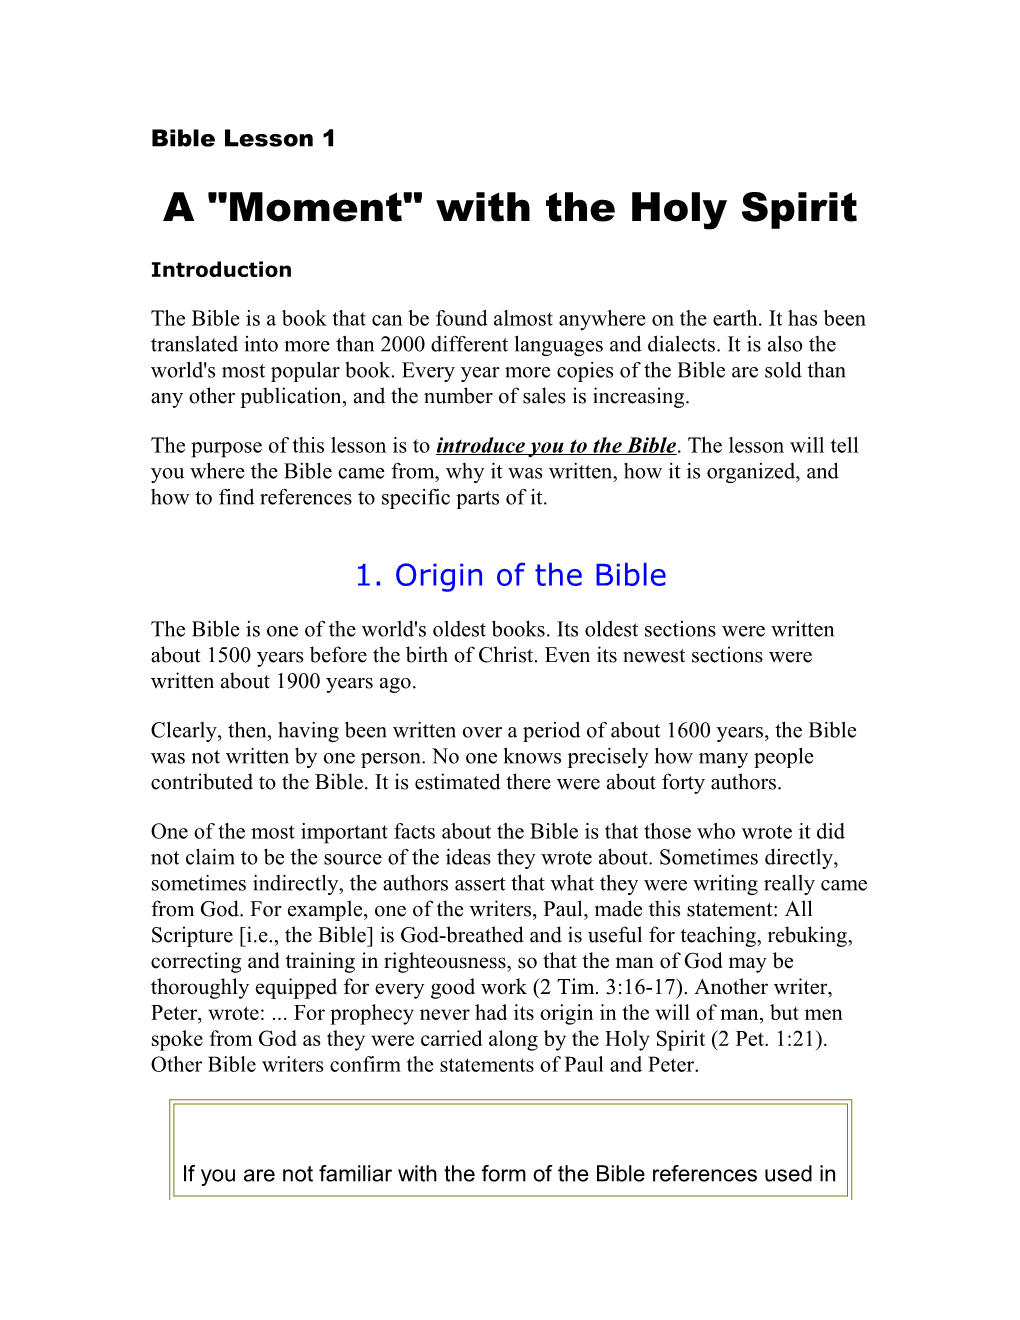 A Moment with the Holy Spirit